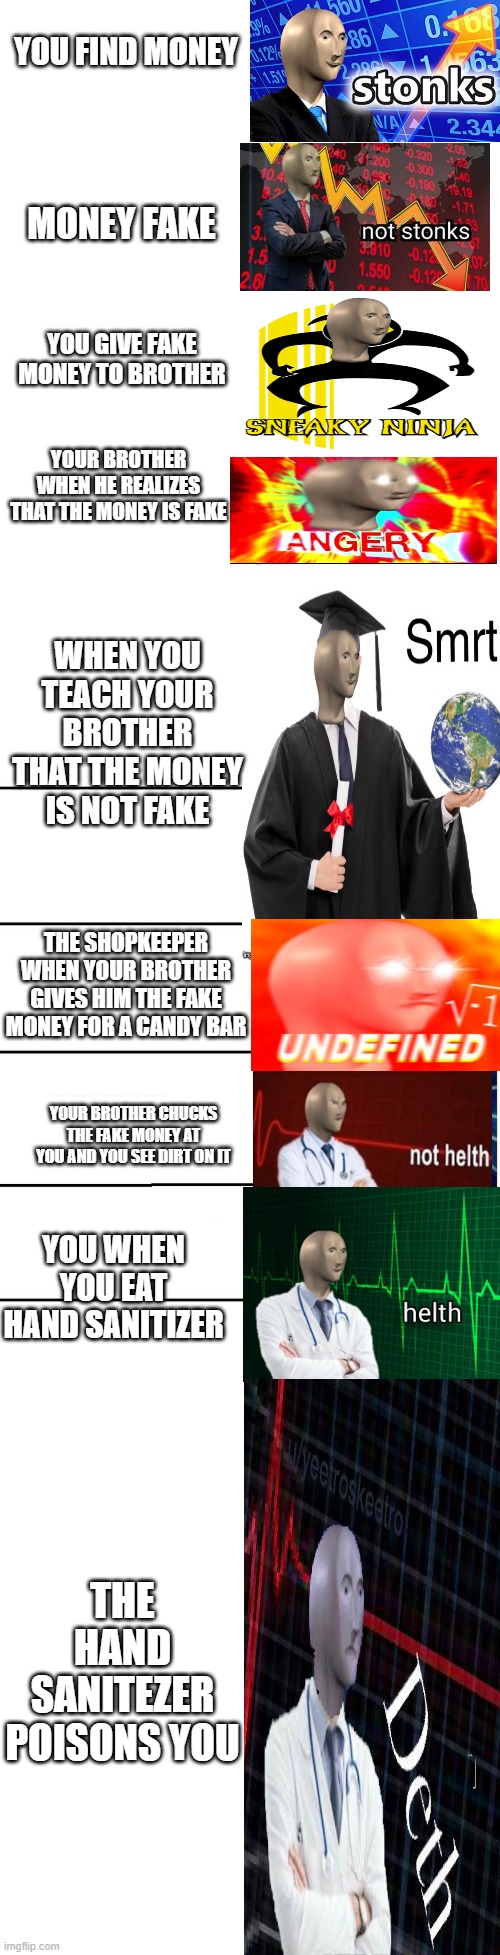 meme man's money | YOU FIND MONEY; MONEY FAKE; YOU GIVE FAKE MONEY TO BROTHER; YOUR BROTHER WHEN HE REALIZES THAT THE MONEY IS FAKE; WHEN YOU TEACH YOUR BROTHER THAT THE MONEY IS NOT FAKE; THE SHOPKEEPER WHEN YOUR BROTHER GIVES HIM THE FAKE MONEY FOR A CANDY BAR; YOUR BROTHER CHUCKS THE FAKE MONEY AT YOU AND YOU SEE DIRT ON IT; YOU WHEN YOU EAT HAND SANITIZER; THE HAND SANITEZER POISONS YOU | image tagged in meme man | made w/ Imgflip meme maker